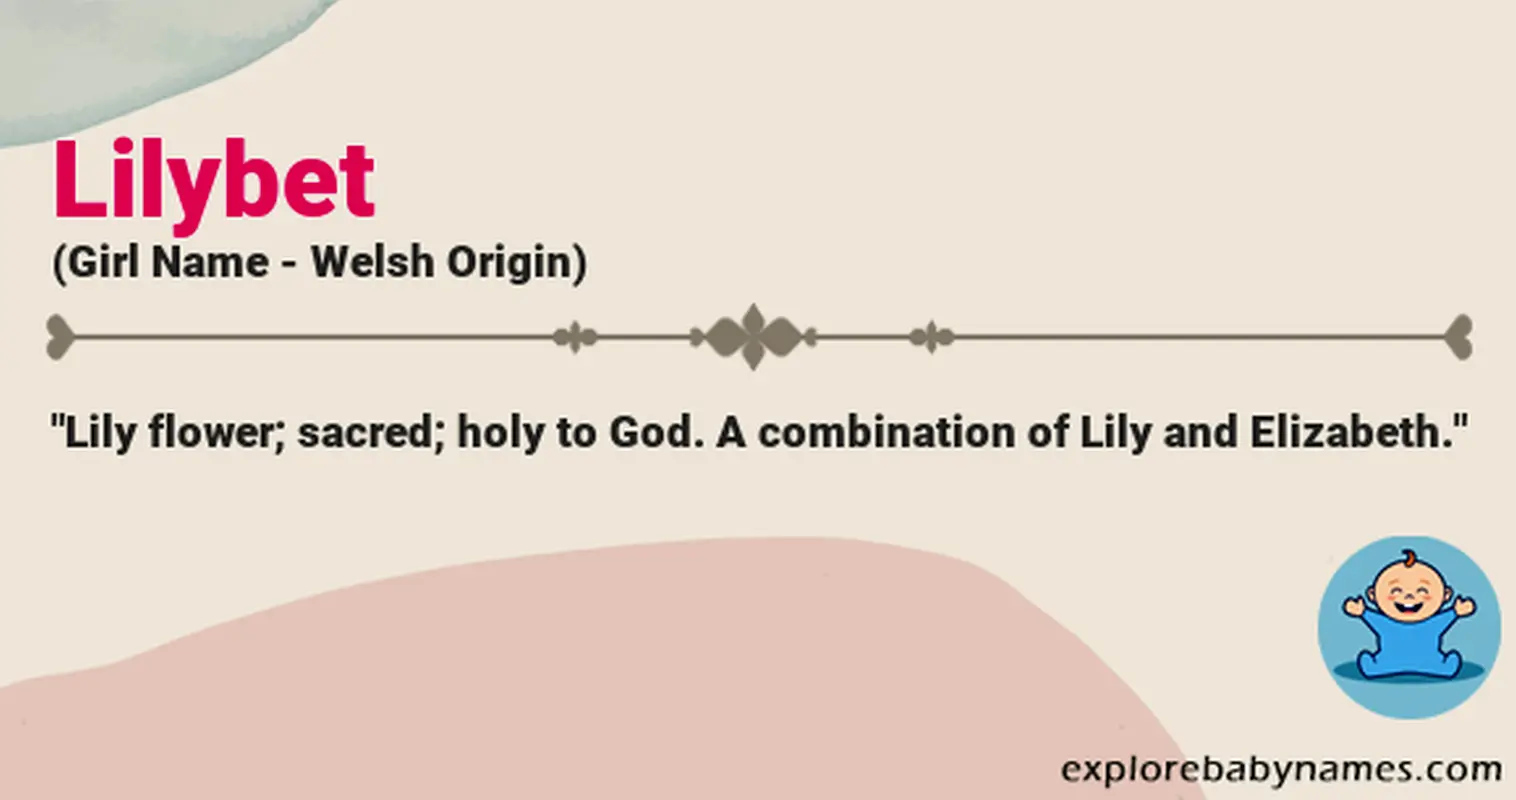 Meaning of Lilybet